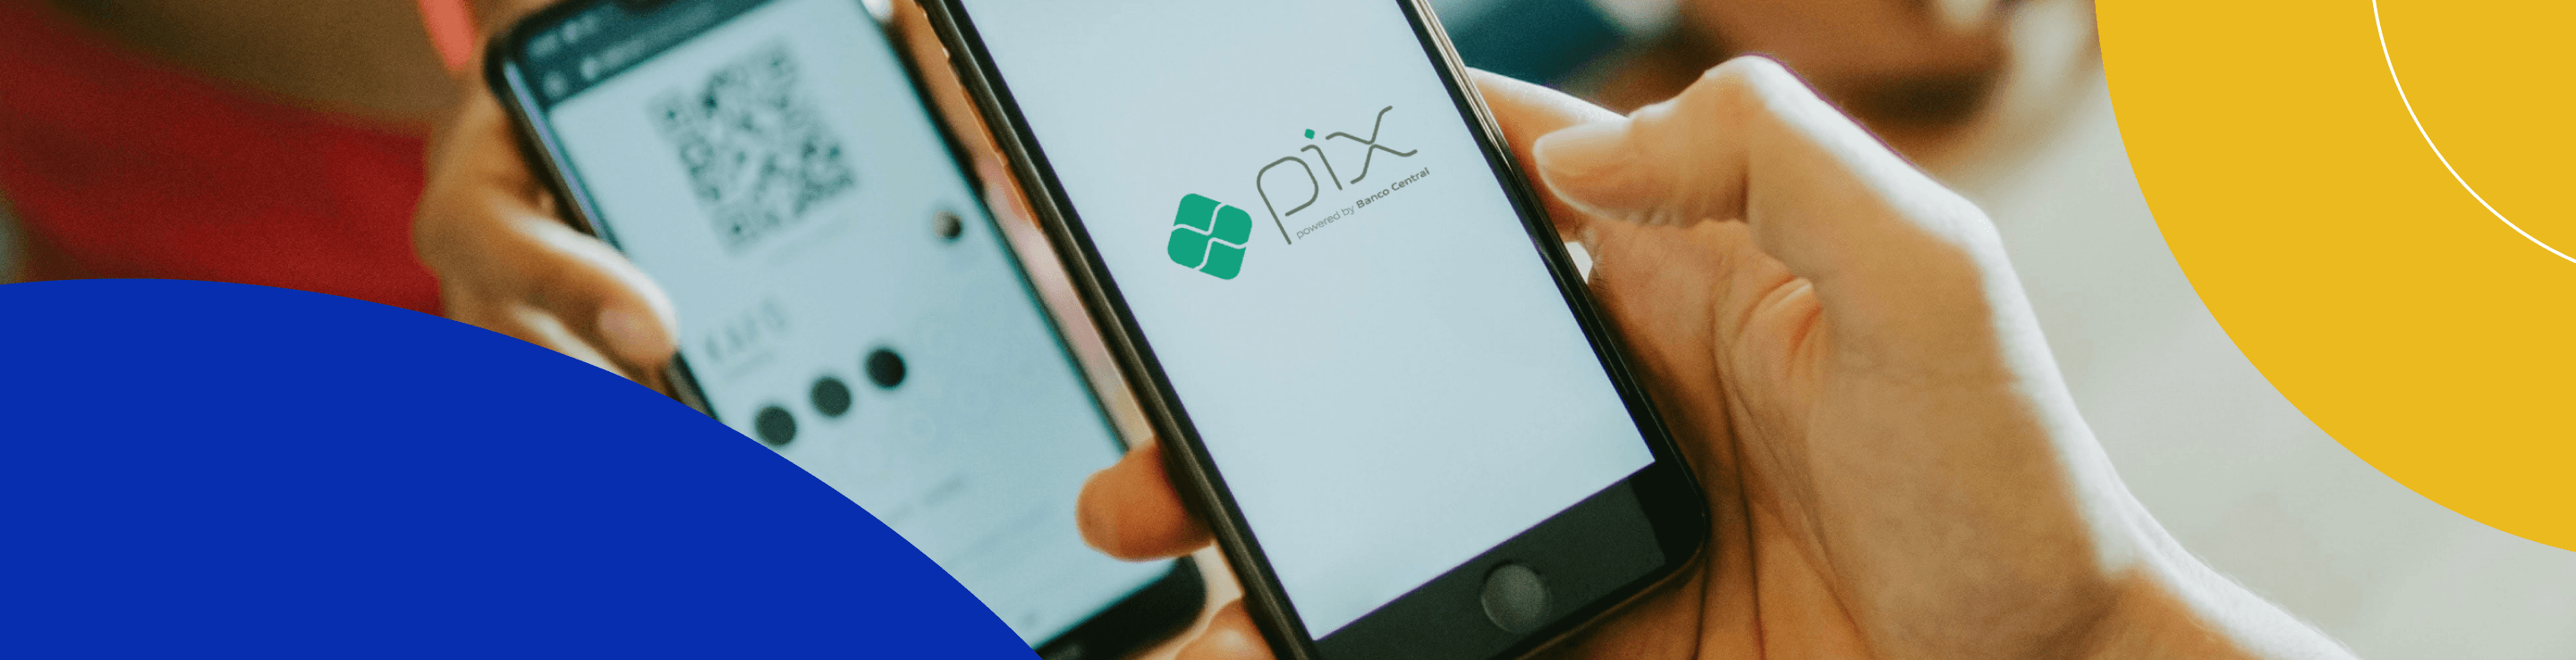 How Pix is transforming e‑commerce in Brazil 